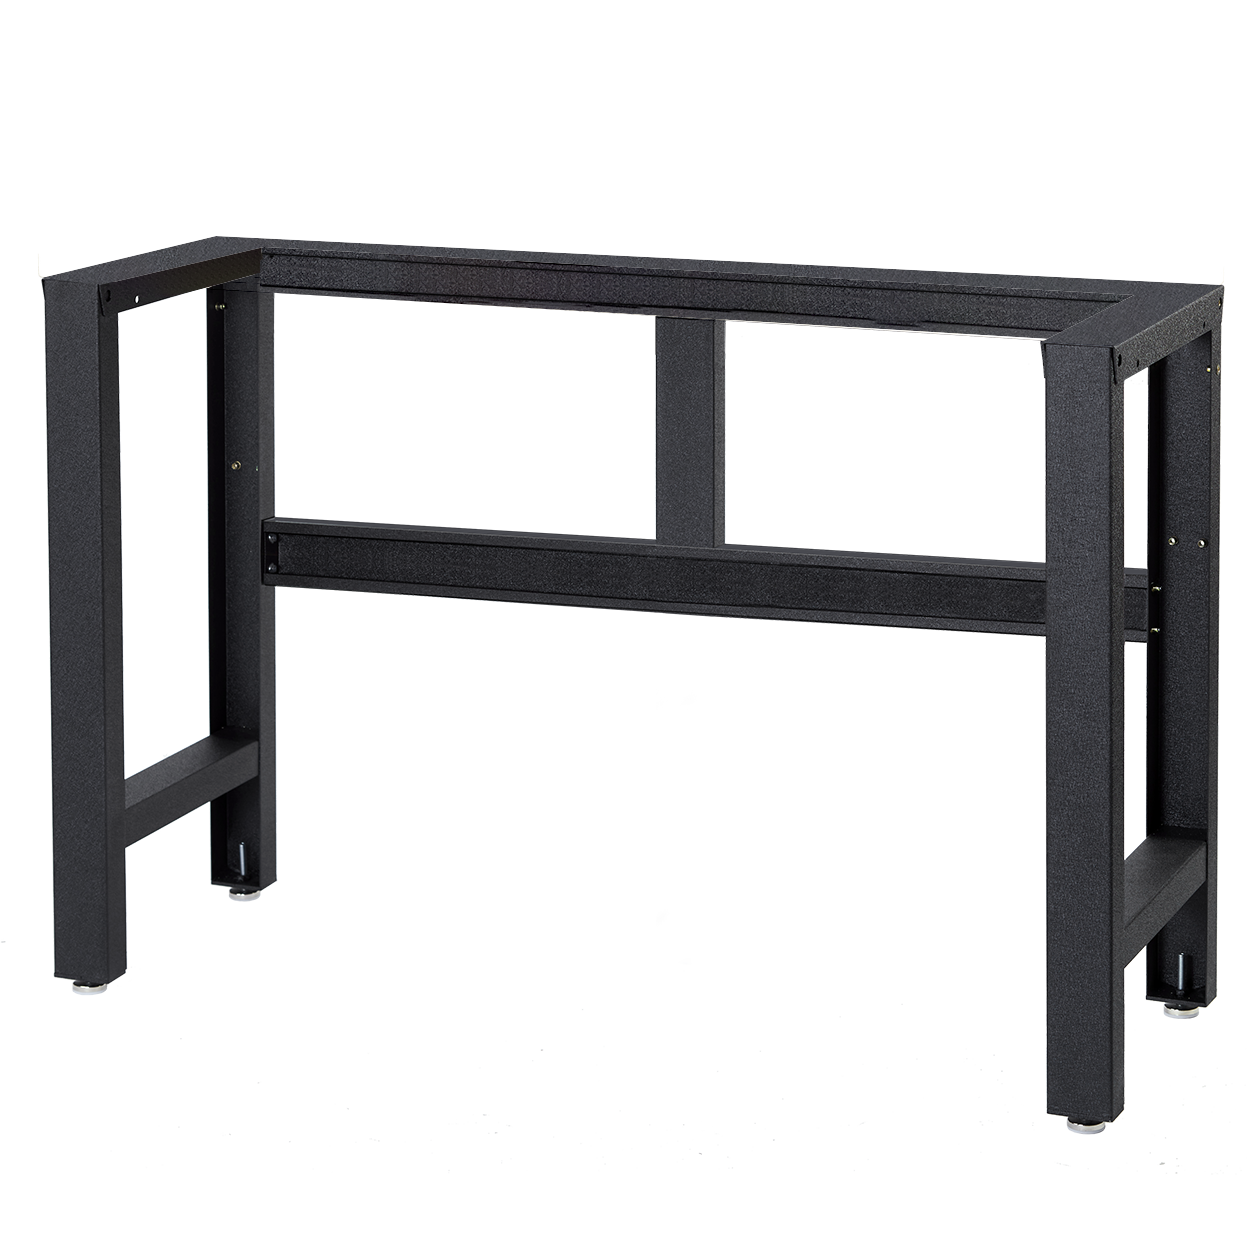 Workbench structure without bench top